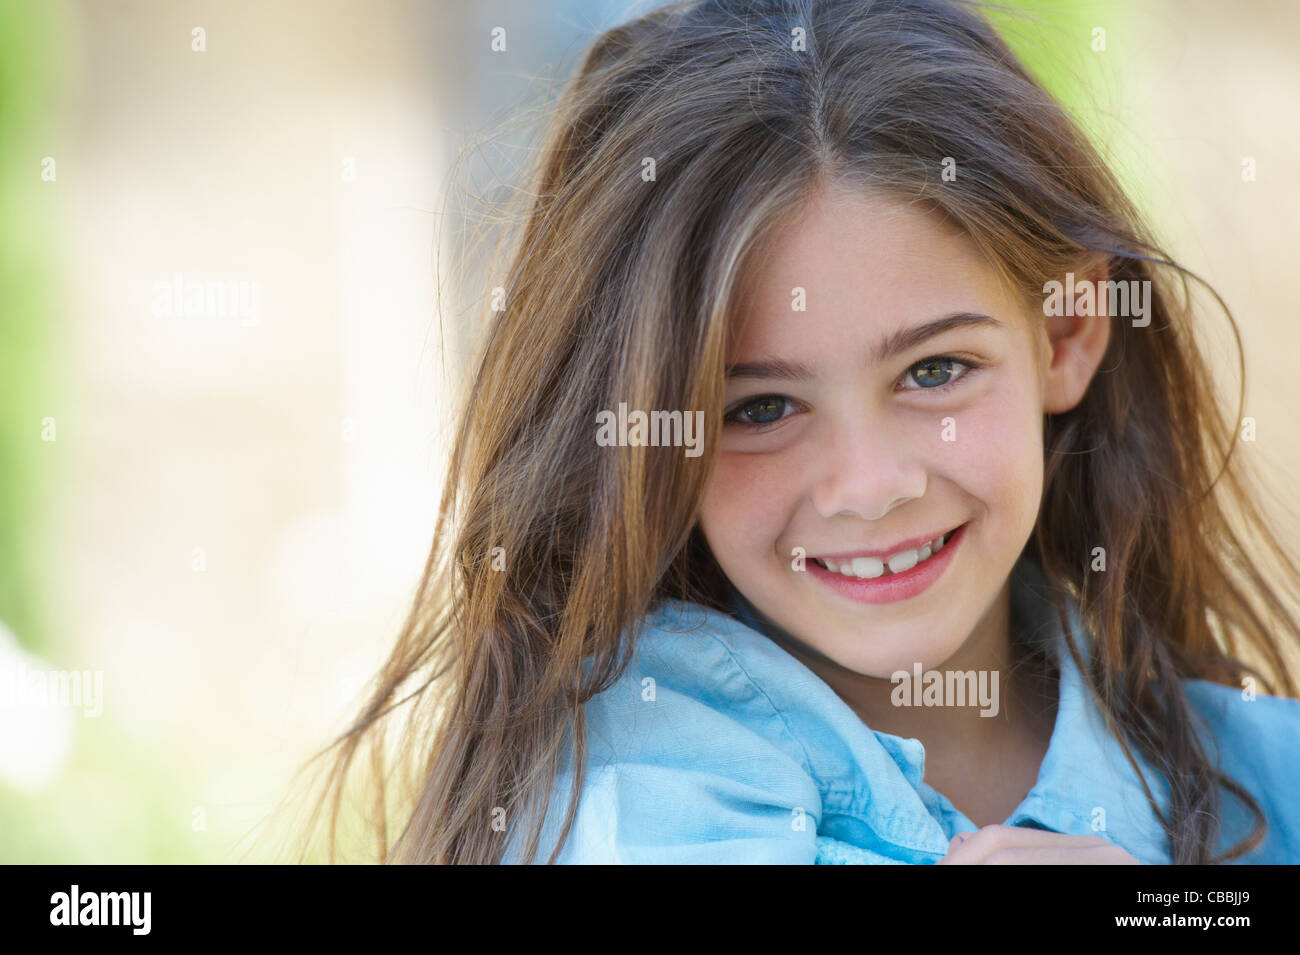 Close up of girl’s smiling face Stock Photo